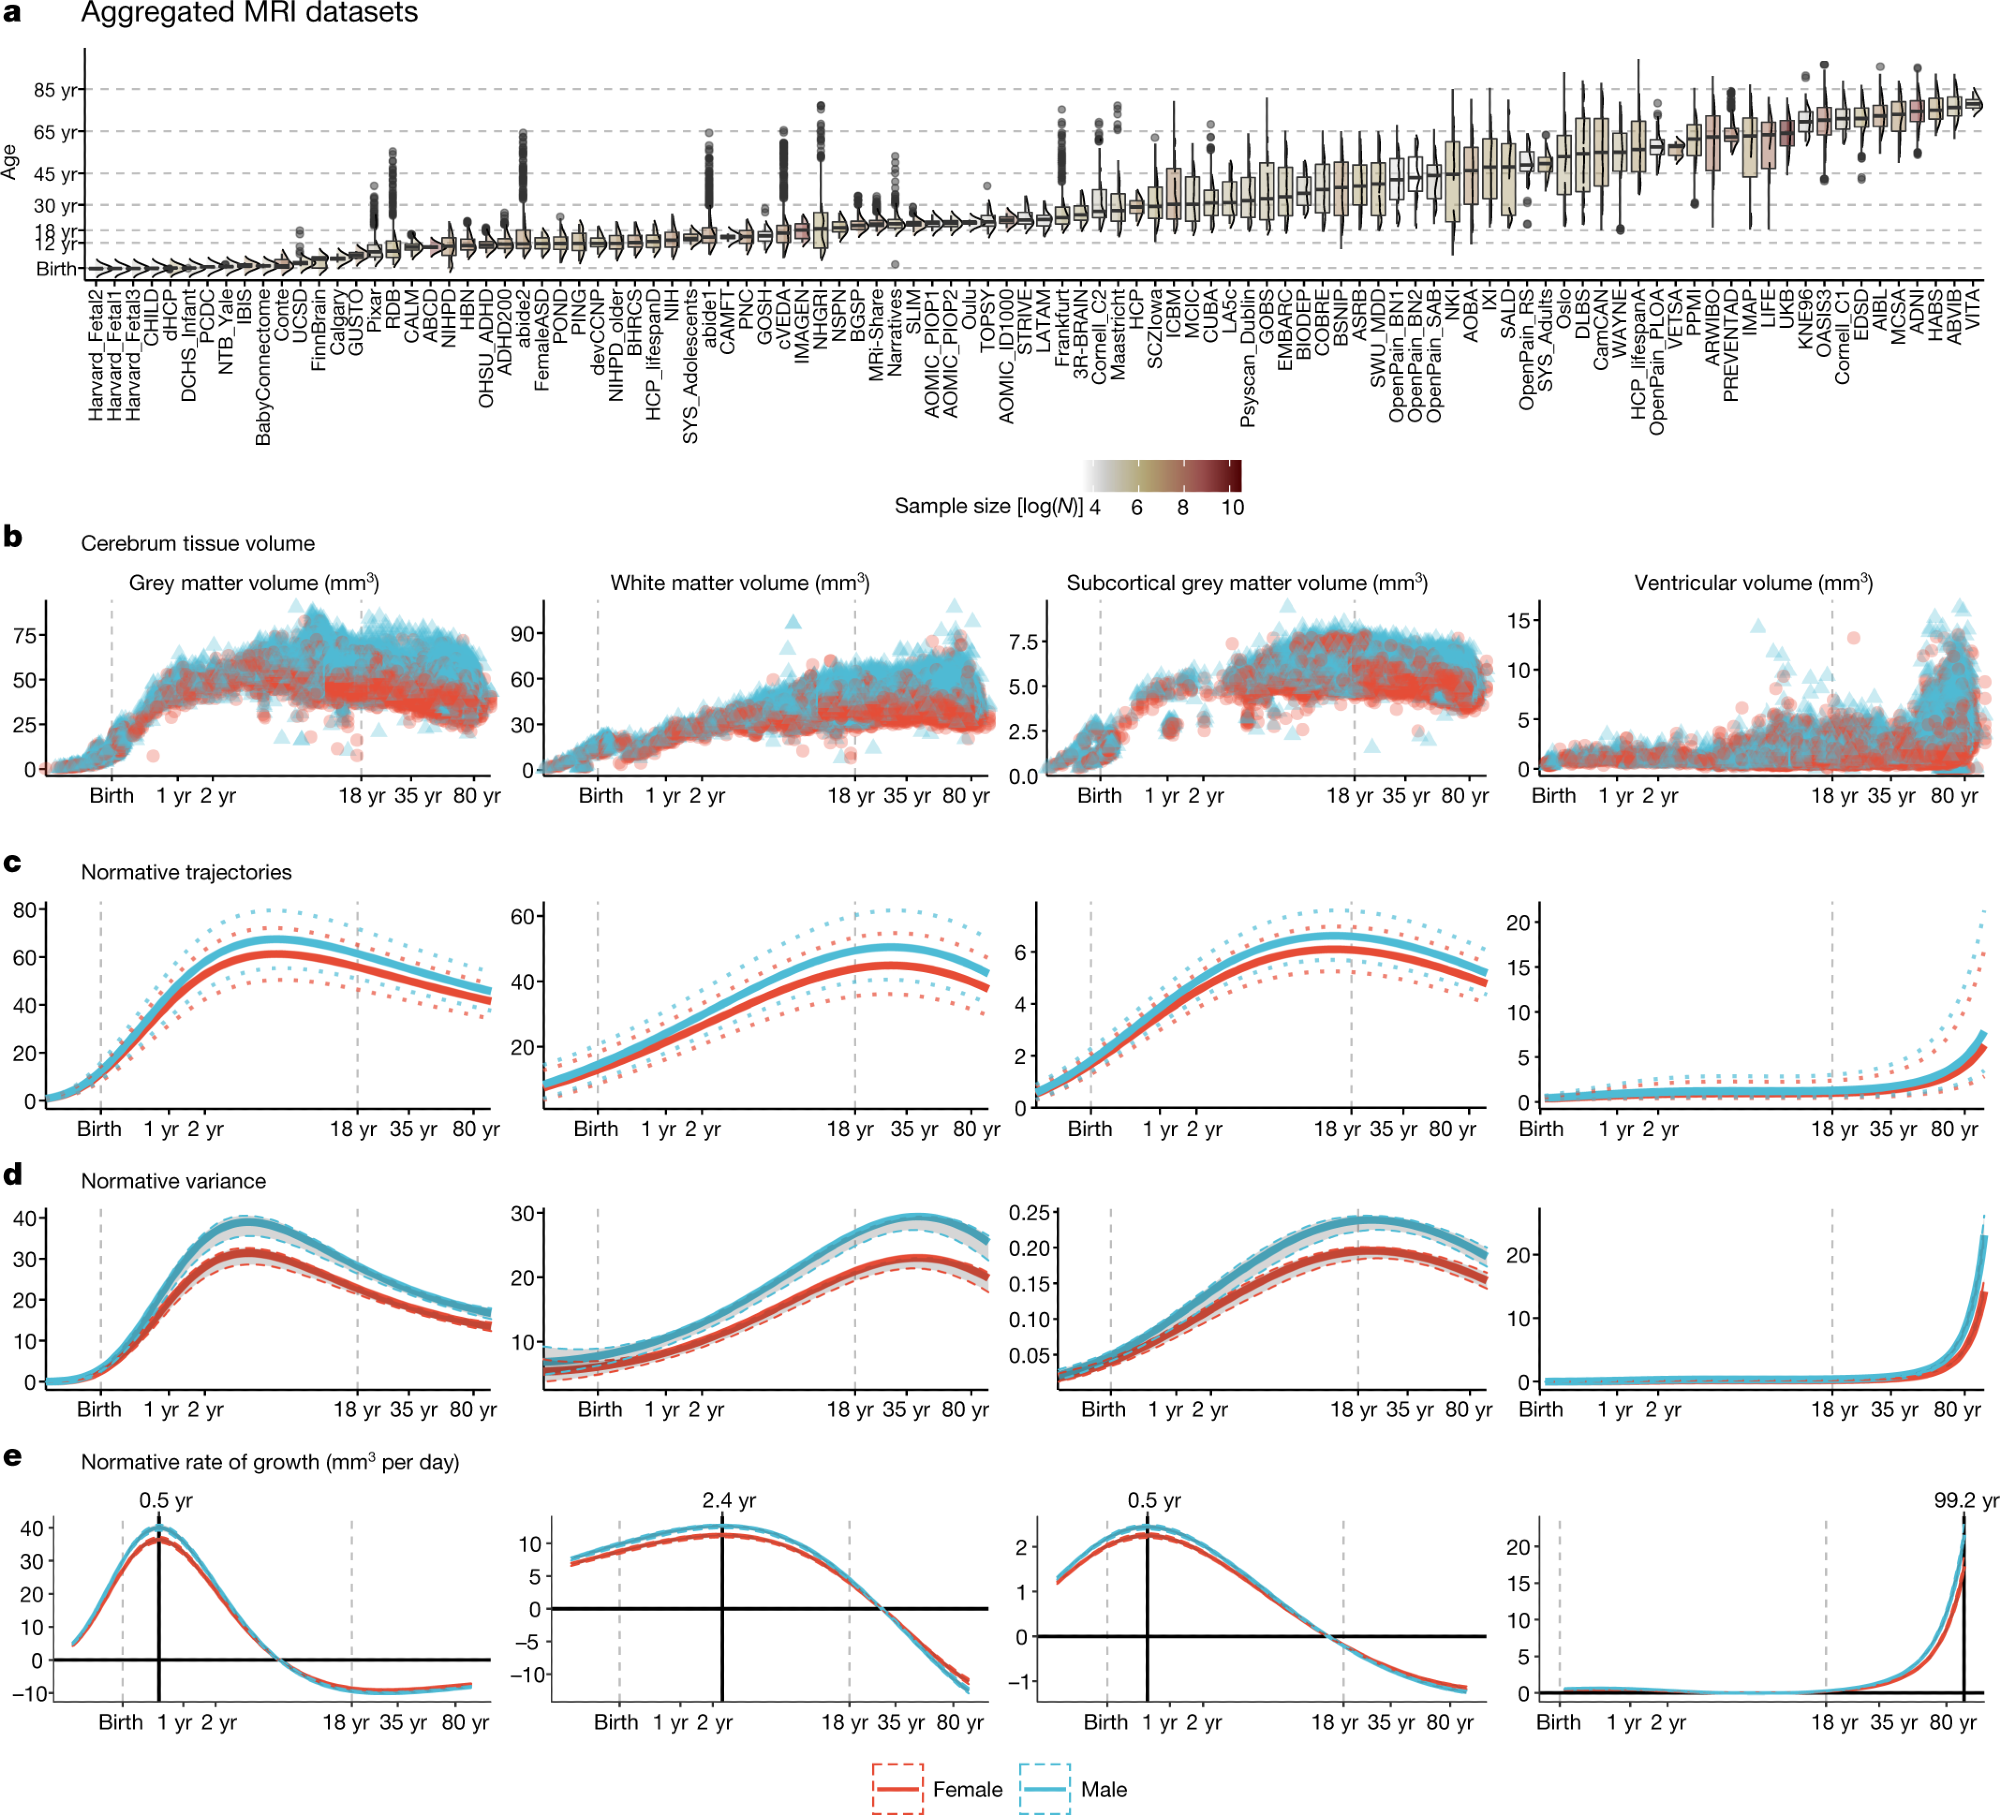 a, MRI data were aggregated from over 100 primary studies comprising 123,984 scans that collectively spanned the age range from mid-gestation to 100 postnatal years. Box–violin plots show the age distribution for each study coloured by its relative sample size (log-scaled using the natural logarithm for visualization purposes). b, Non-centiled, ‘raw’ bilateral cerebrum tissue volumes for grey matter, white matter, subcortical grey matter and ventricles are plotted for each cross-sectional control scan as a function of age (log-scaled); points are colored by sex. c, Normative brain-volume trajectories were estimated using GAMLSS, accounting for site- and study-specific batch effects, and stratified by sex (female, red; male, blue). All four cerebrum tissue volumes demonstrated distinct, non-linear trajectories of their medians (with 2.5% and 97.5% centiles denoted as dotted lines) as a function of age over the lifespan.  d, Trajectories of median between-subject variability and 95% confidence intervals for four cerebrum tissue volumes were estimated by sex-stratified bootstrapping (see Supplementary Information 3 for details). e, Rates of volumetric change across the lifespan for each tissue volume, stratified by sex, were estimated by the first derivatives of the median volumetric trajectories. For solid (parenchymal) tissue volumes, the horizontal line (y = 0) indicates when the volume at which each tissue stops growing and starts shrinking and the solid vertical line indicates the age of maximum growth of each tissue. . Note that y axes in b–e are scaled in units of 10,000 mm3 (10 ml).